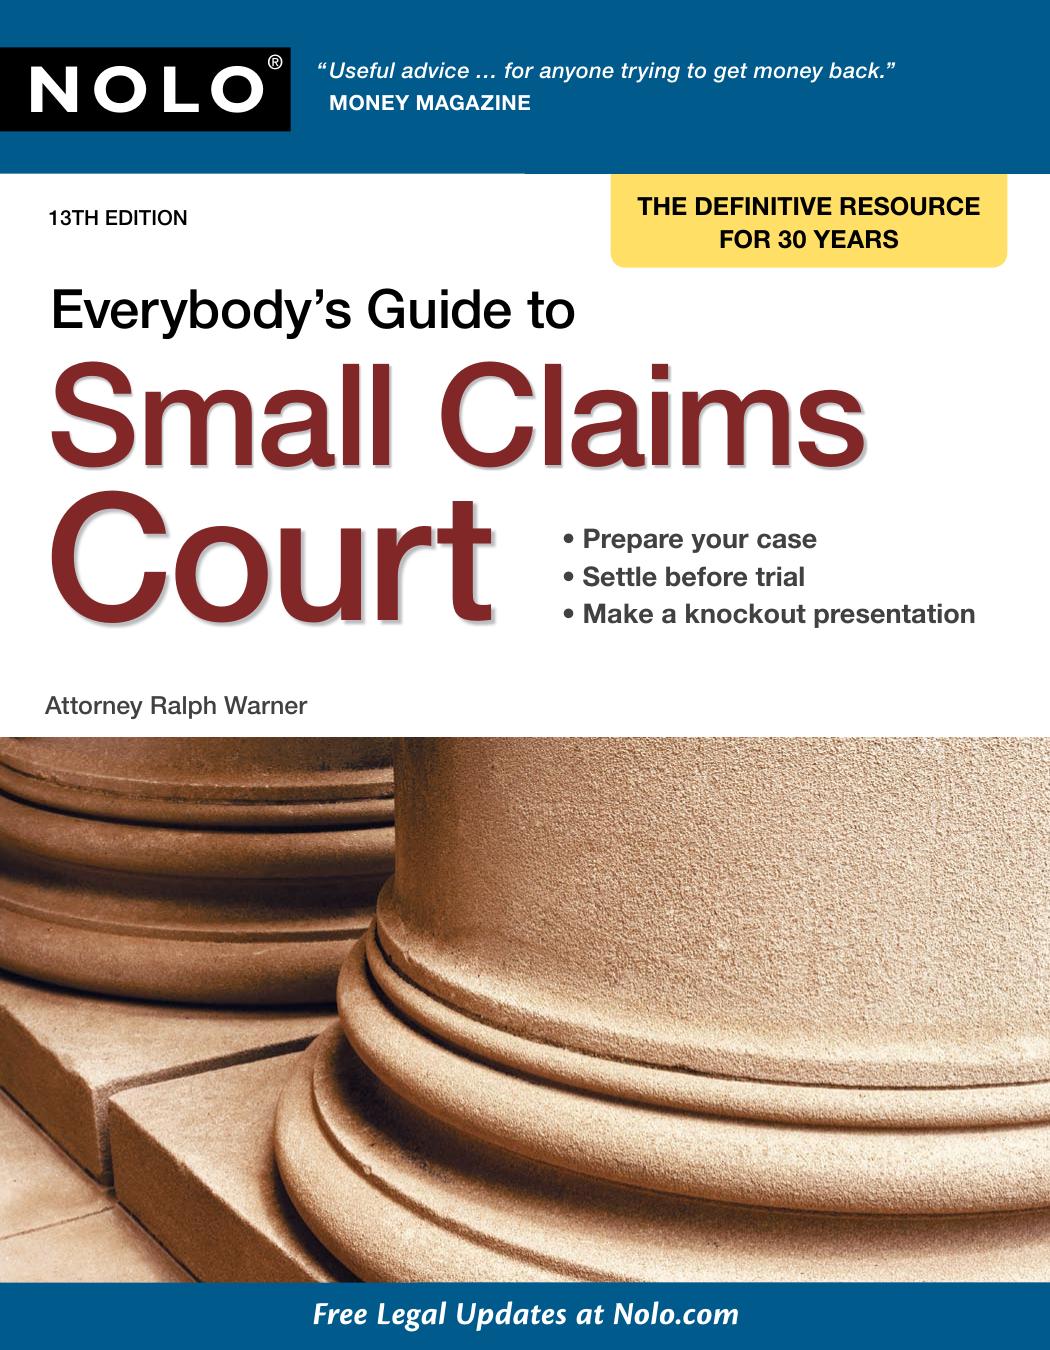 Everybody's Guide to Small Claims Court by Attorney Ralph Warner (Nolo)